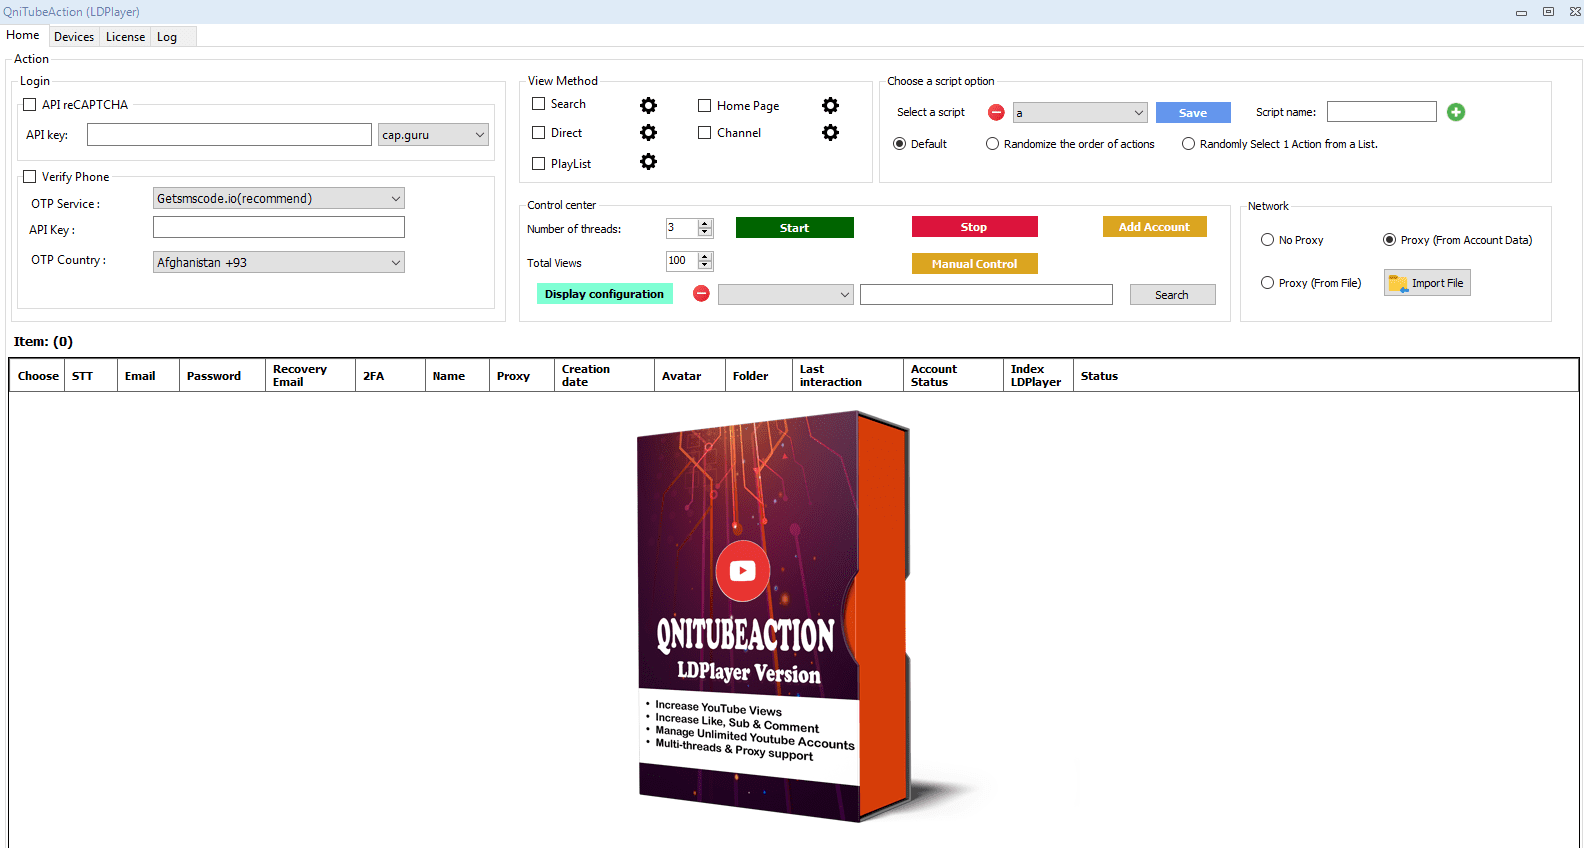 Youtube watchtime software - qnitubeaction